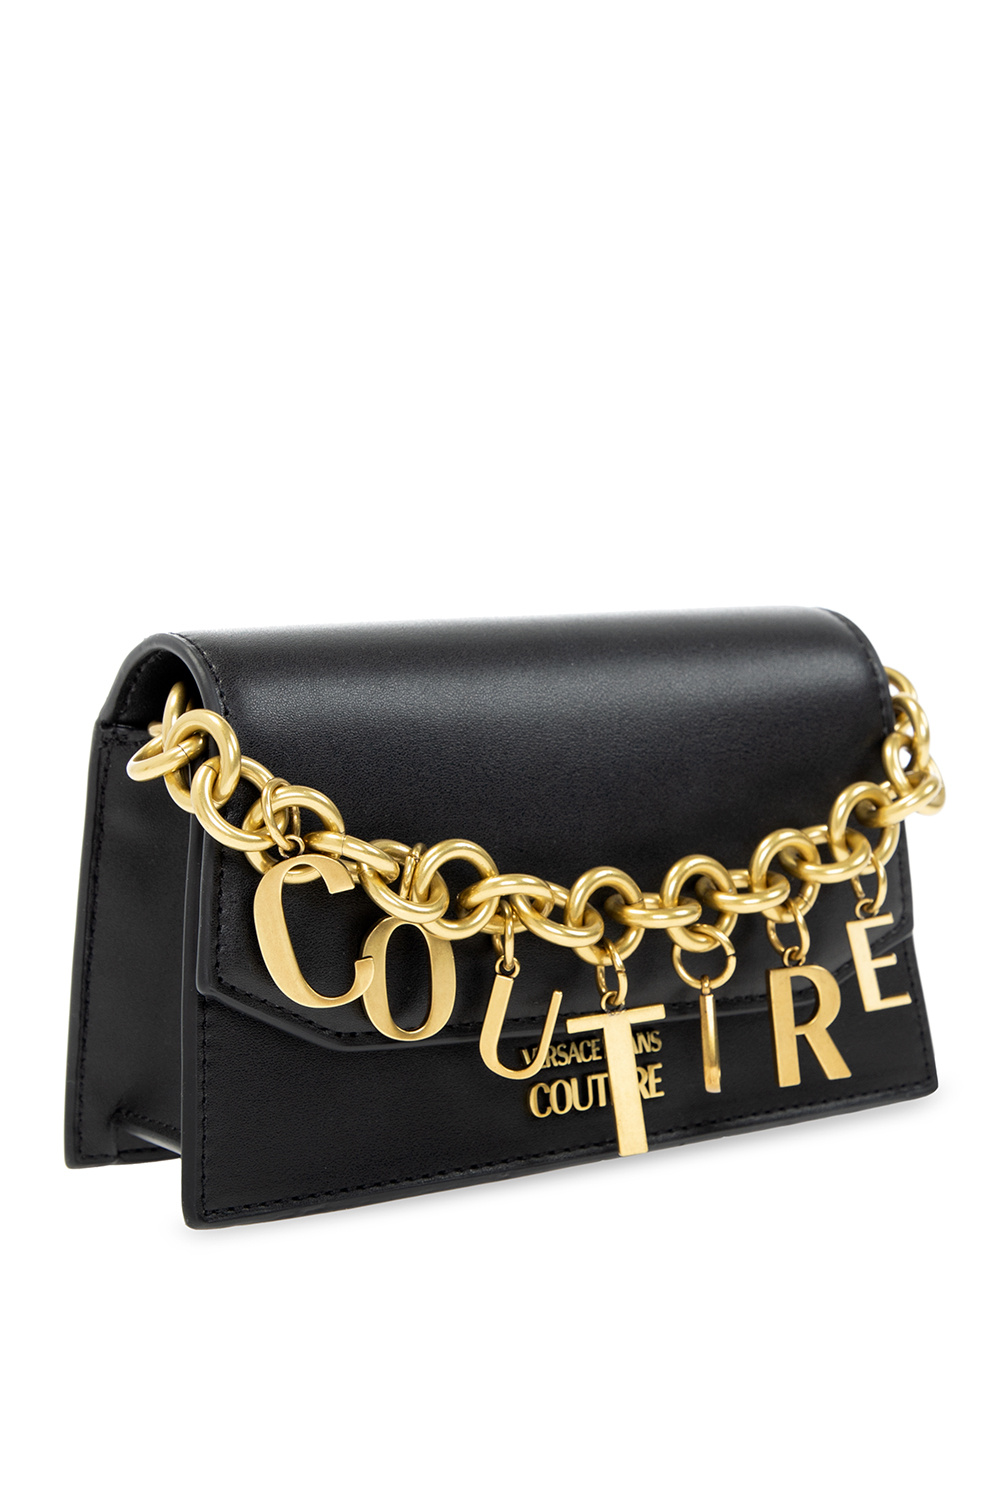 Versace Jeans Couture Chain Couture Tote Bag, Black+gold, One Size